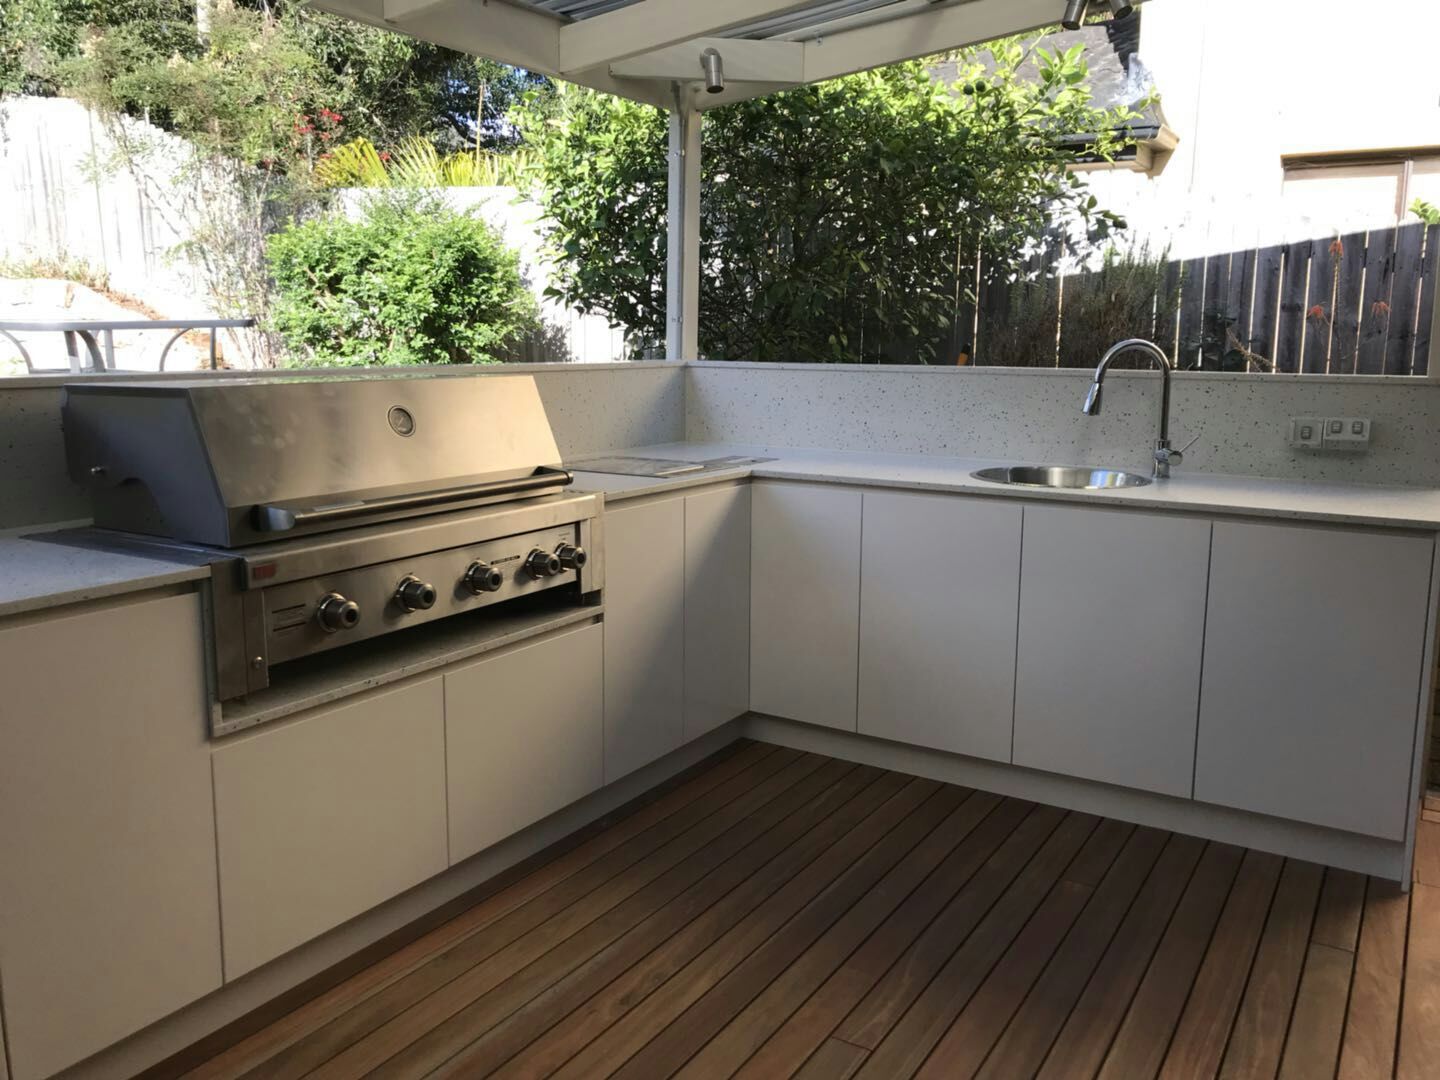 Outdoor kitchen and entertainment area | Bunnings Workshop Community